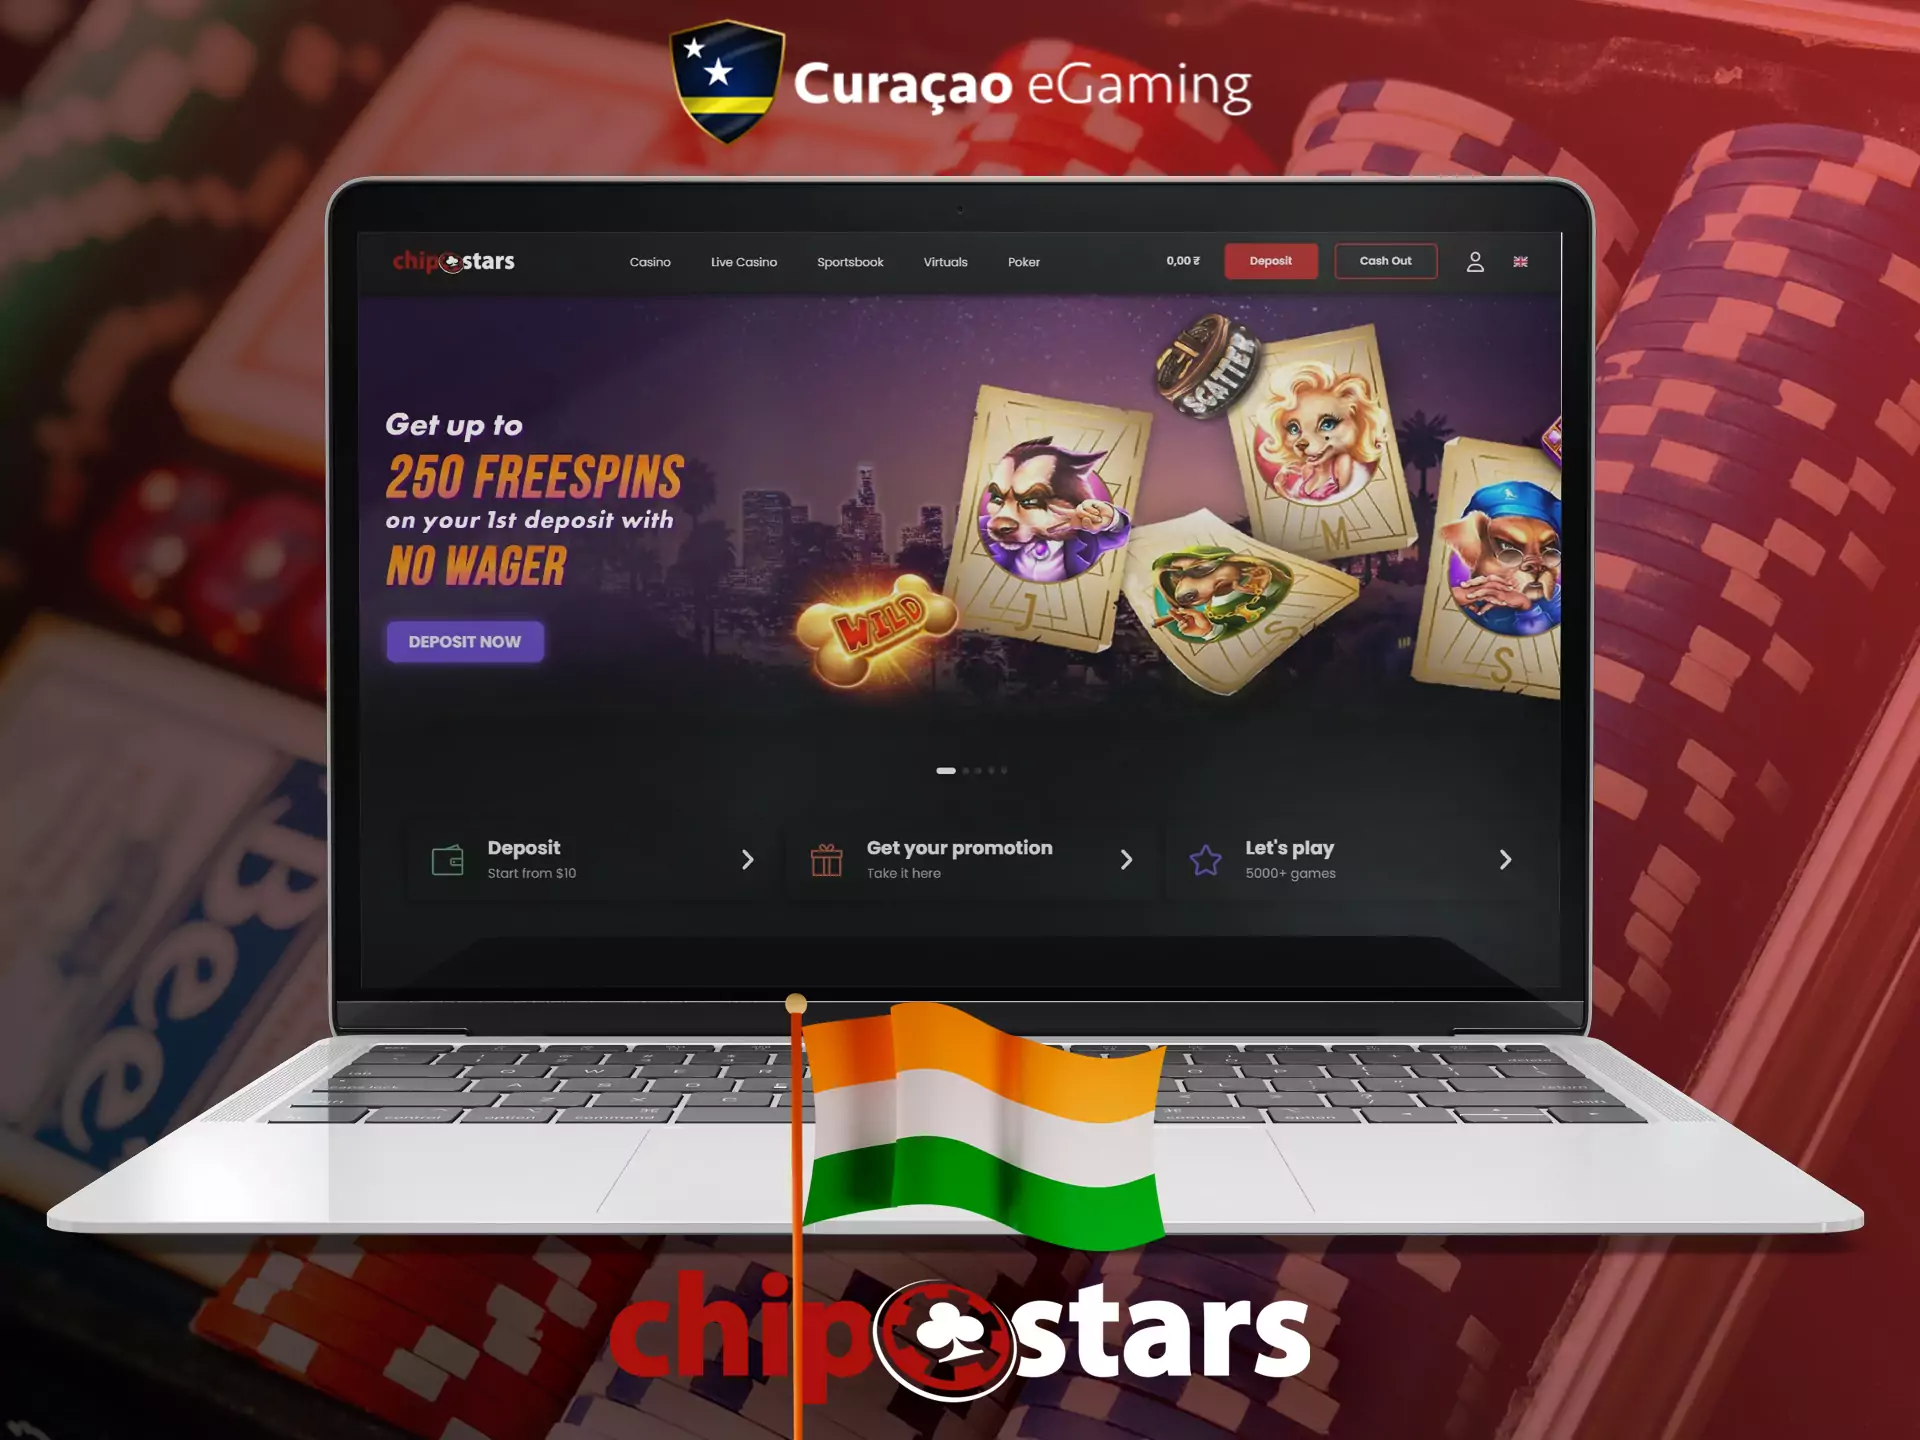 The Chipstars site accepts bets legally since it is working under the Curacao license.